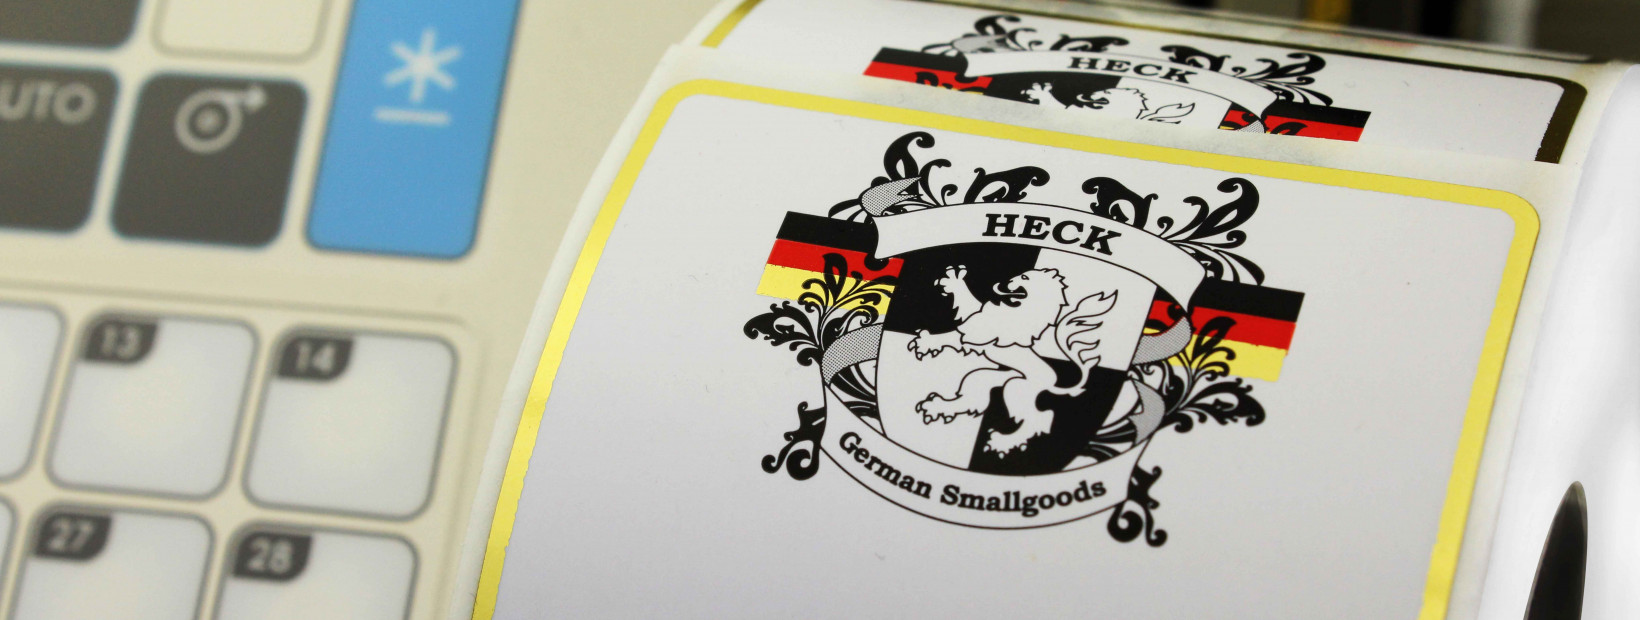 Scale Label NZ Heck banner 1640 x 6200